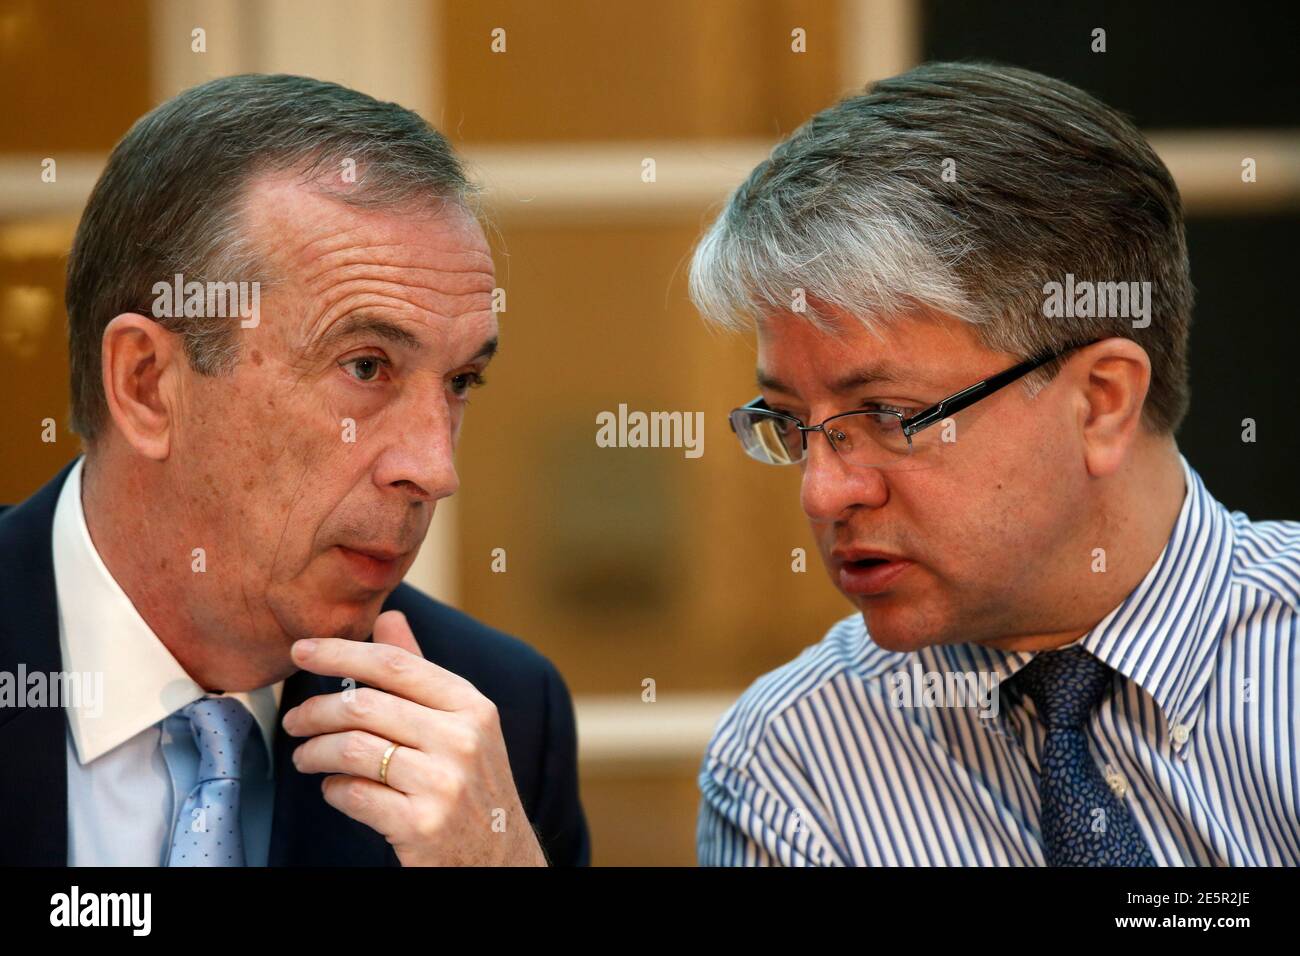 BNP Paribas bank Chief Executive Officer Jean-Laurent Bonnafe (R) speaks  with Alain Papiasse, BNP Head of Corporate & Investment Banking and Deputy  Chief Operating Officer, during the bank's 2014-2016 business development  plan